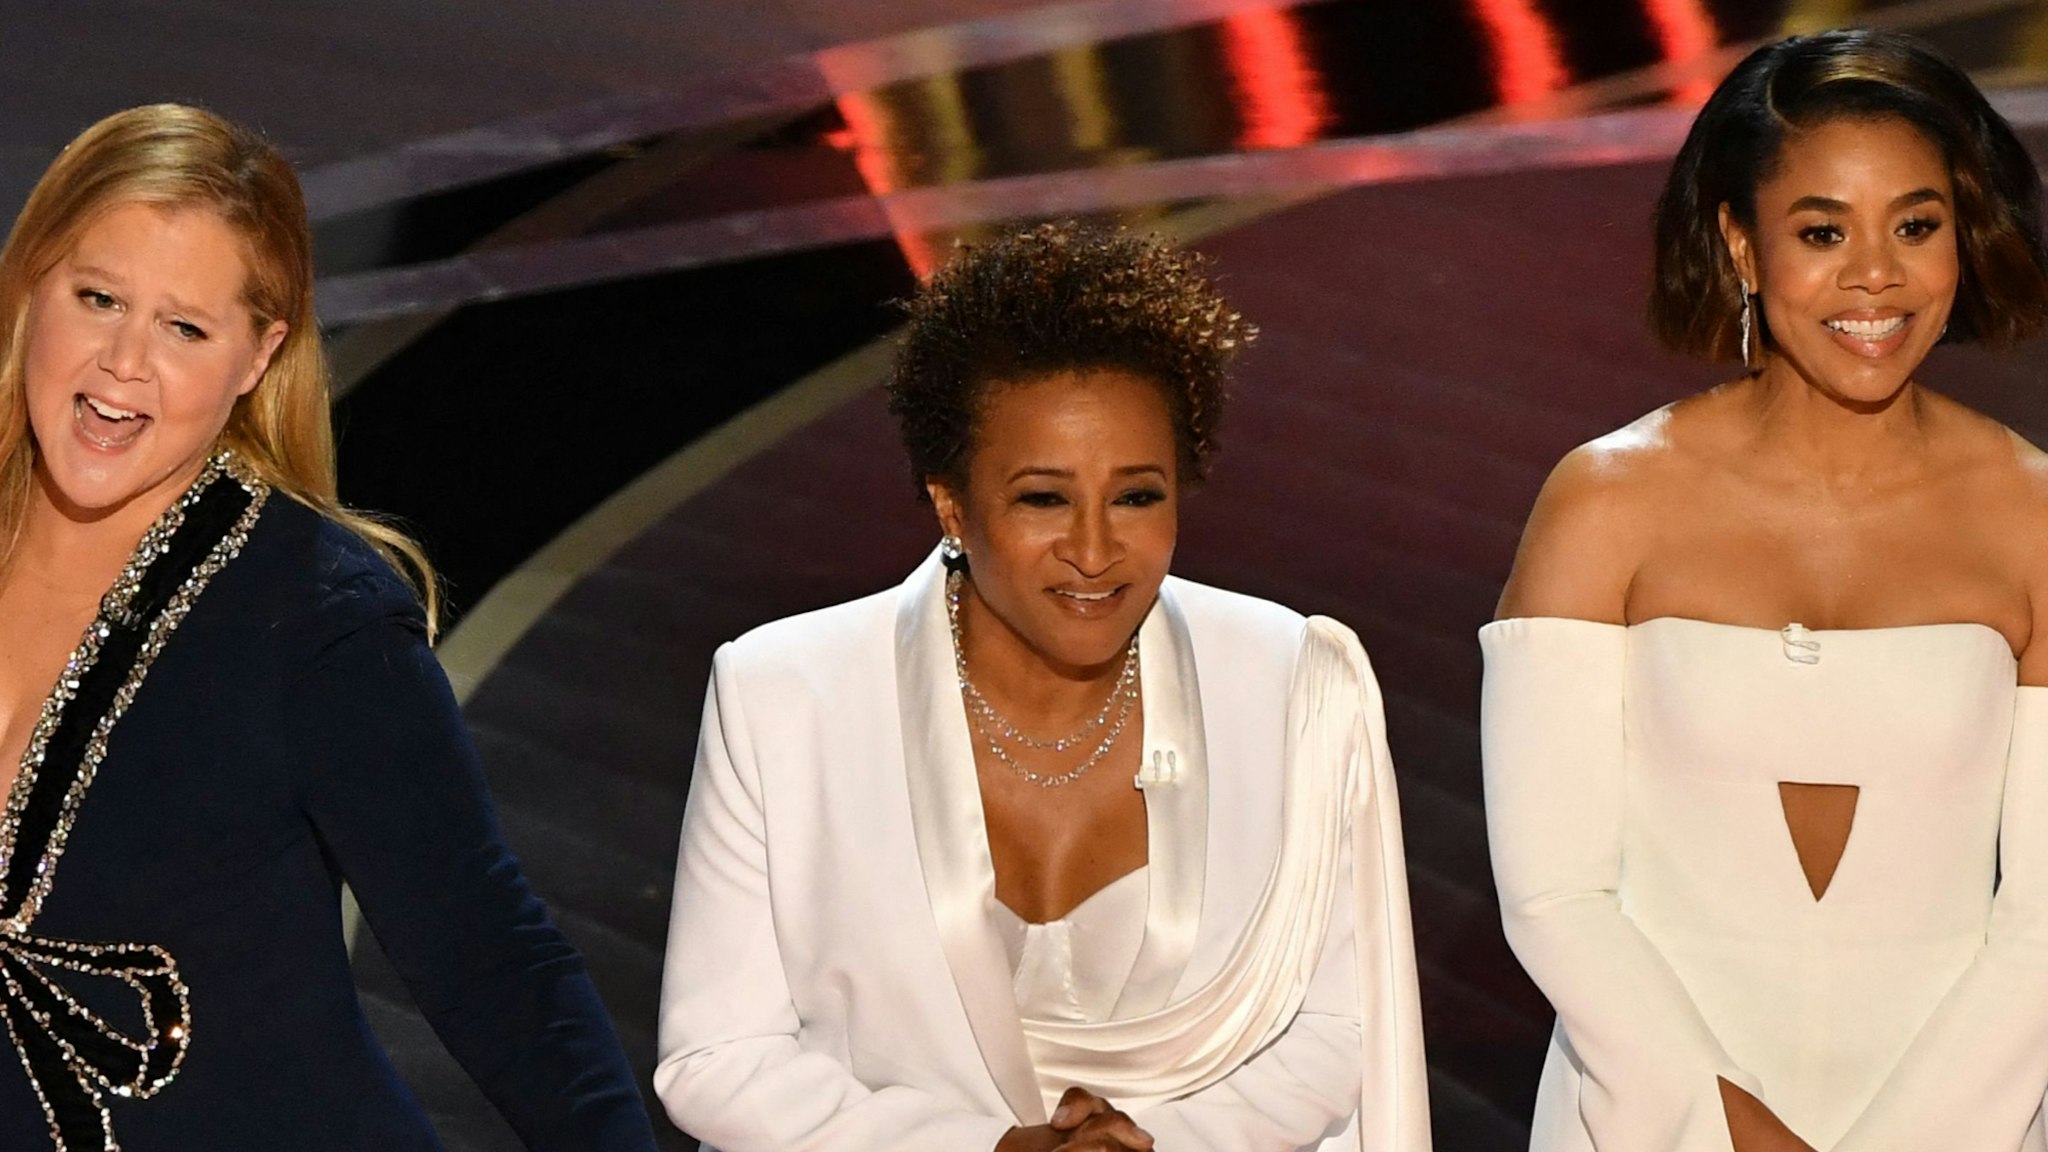 US actress and comedian Wanda Sykes (C) and US actress Regina Hall speak onstage during the 94th Oscars at the Dolby Theatre in Hollywood, California on March 27, 2022.